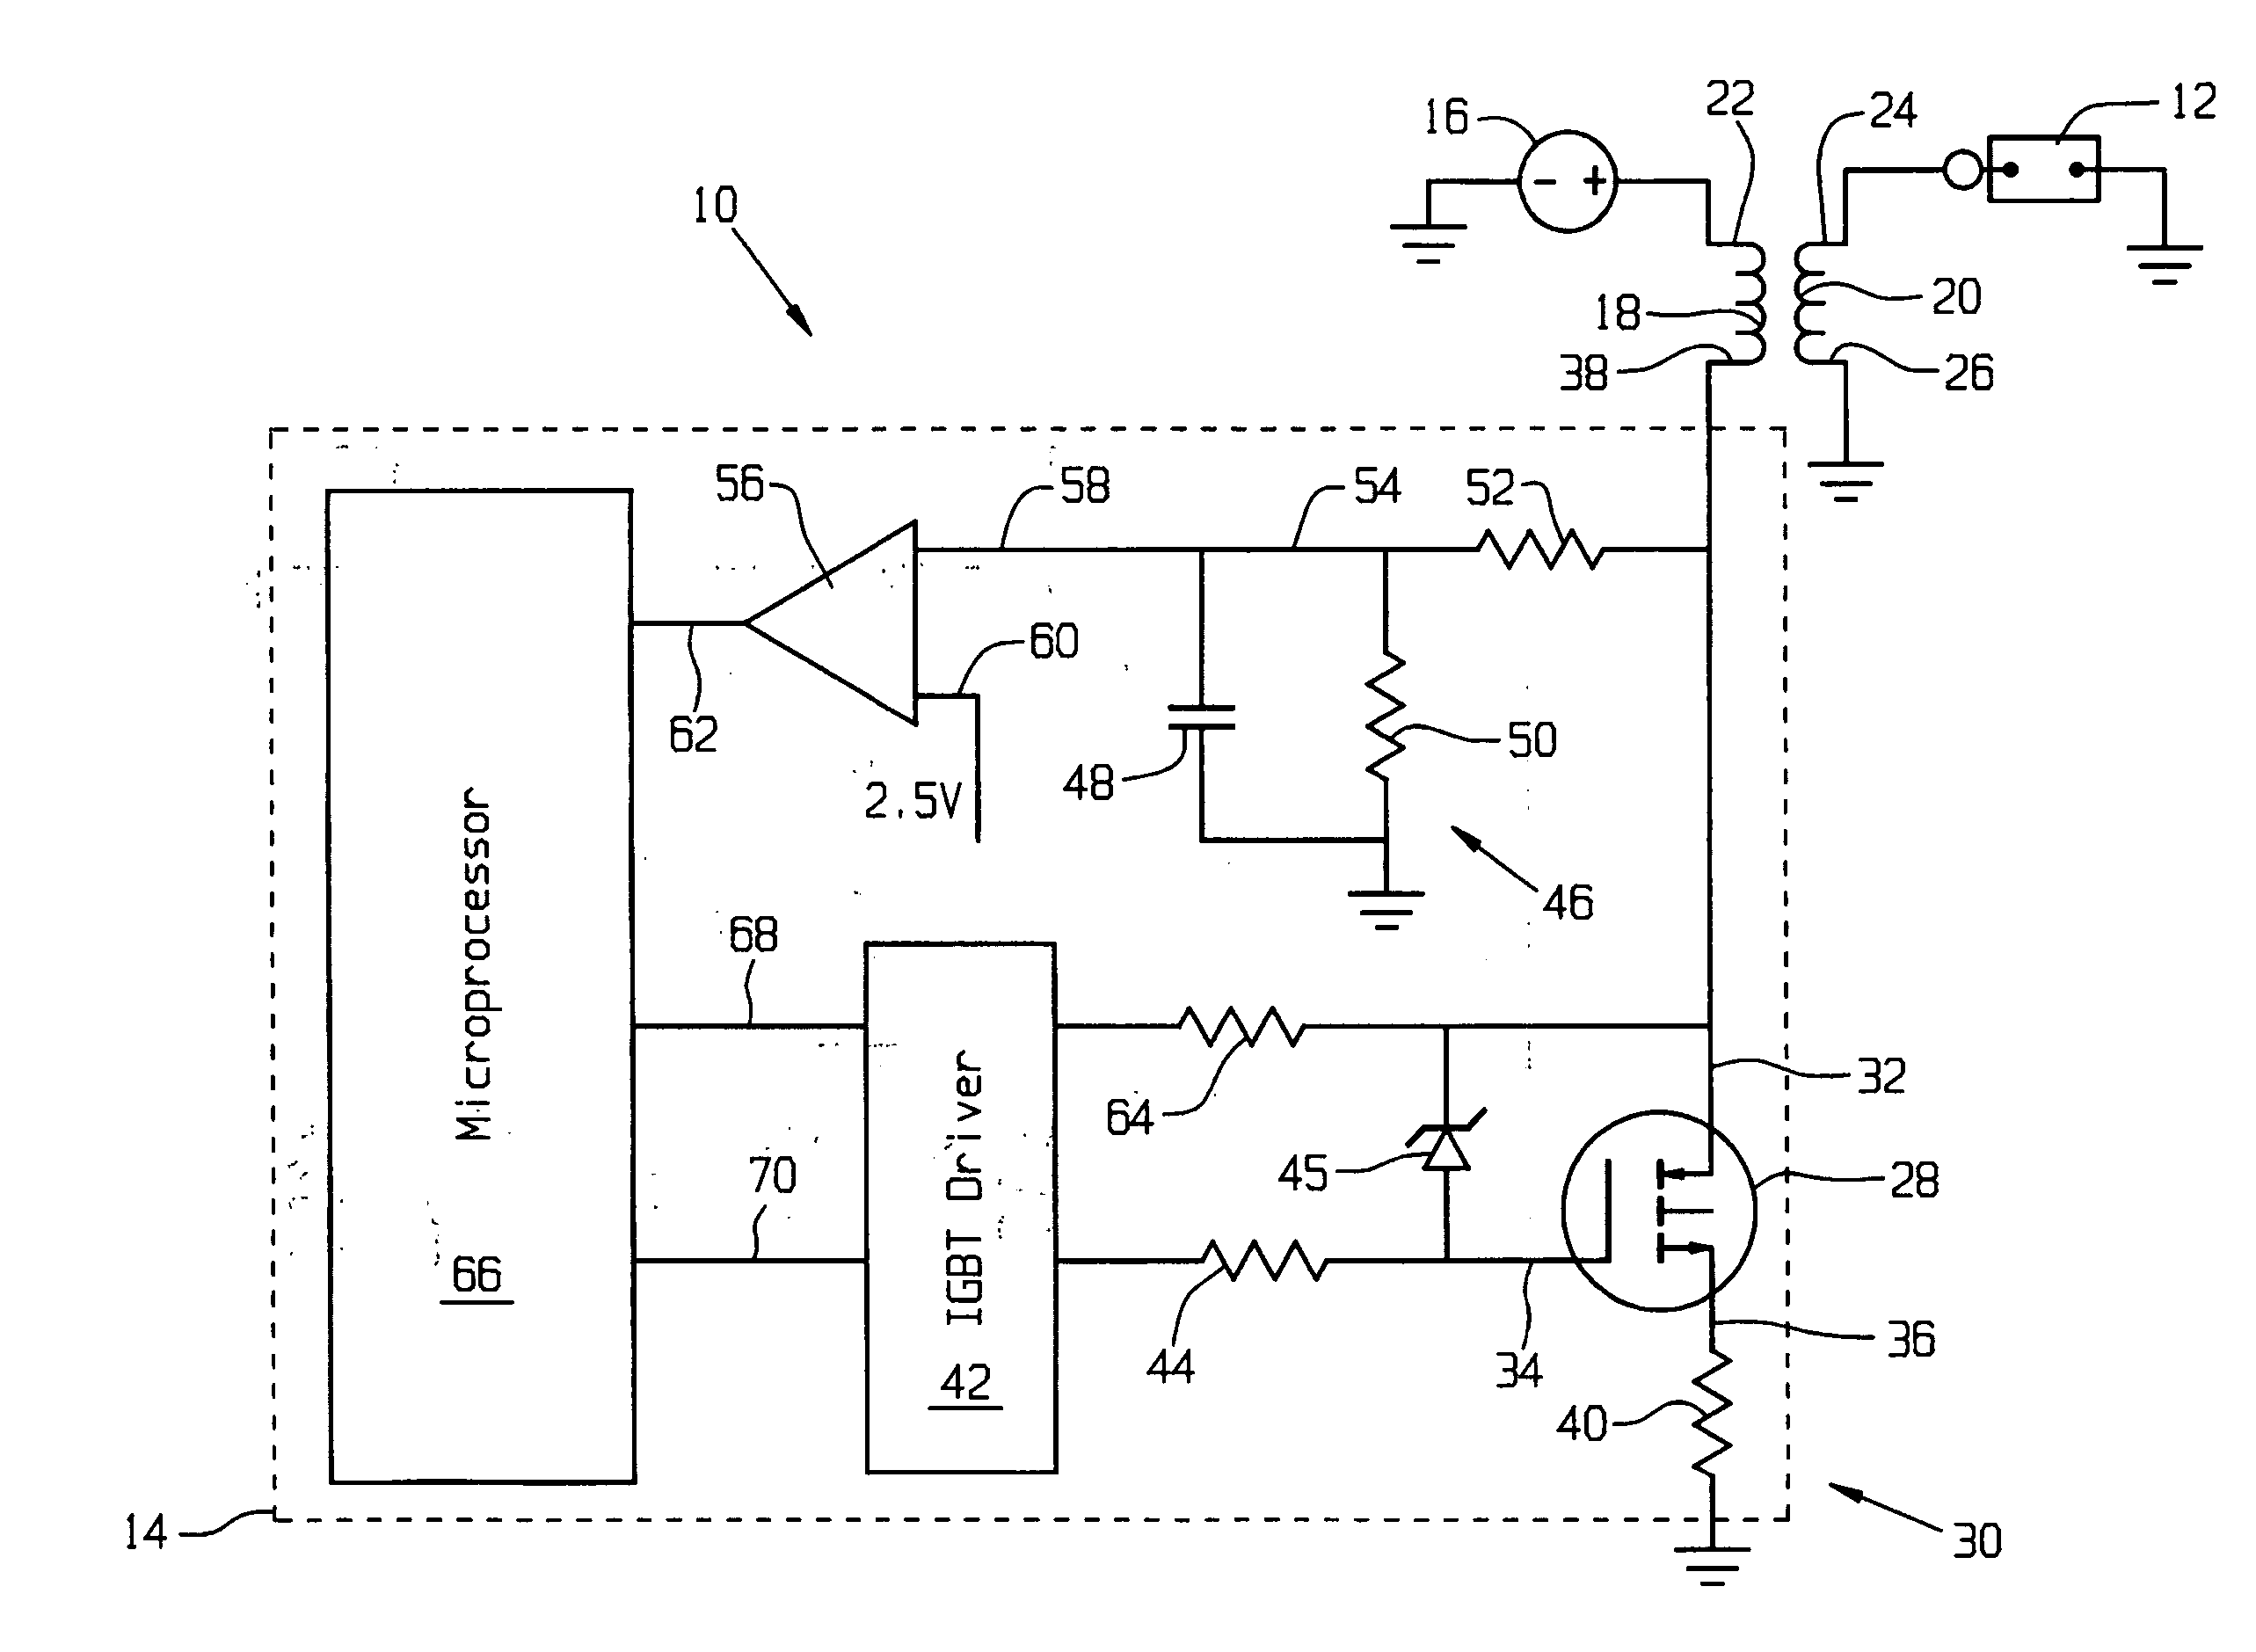 Circuit for protecting a transistor from an open secondary ignition coil